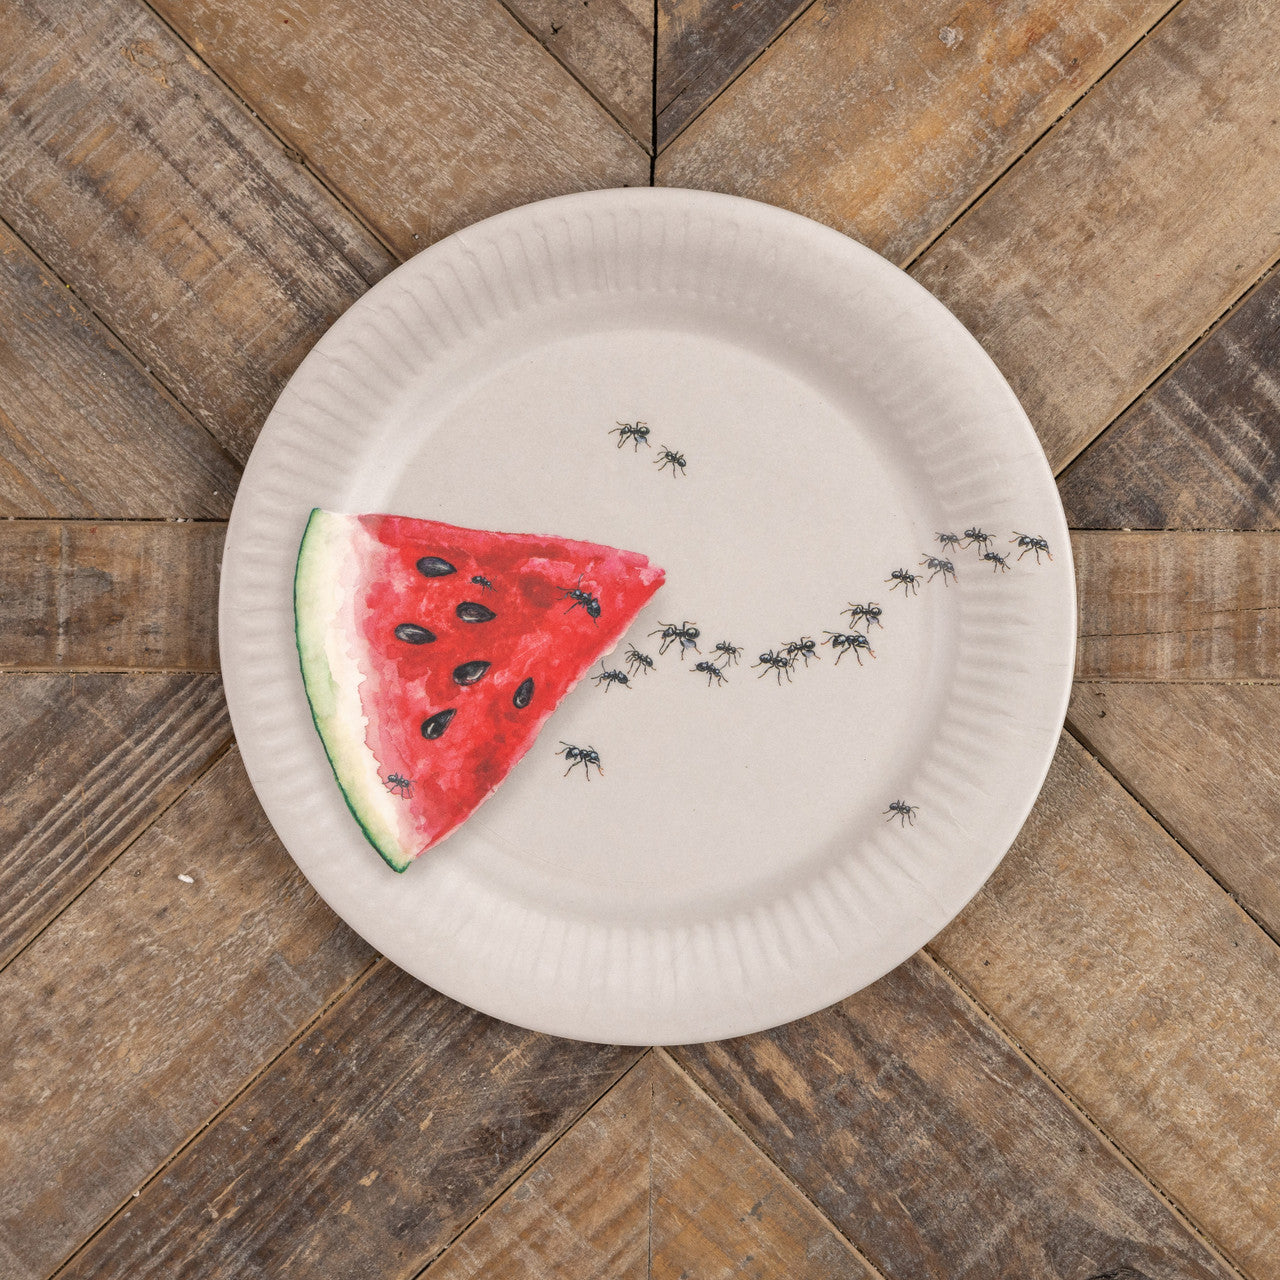 10" Watermelon with Ants Plate